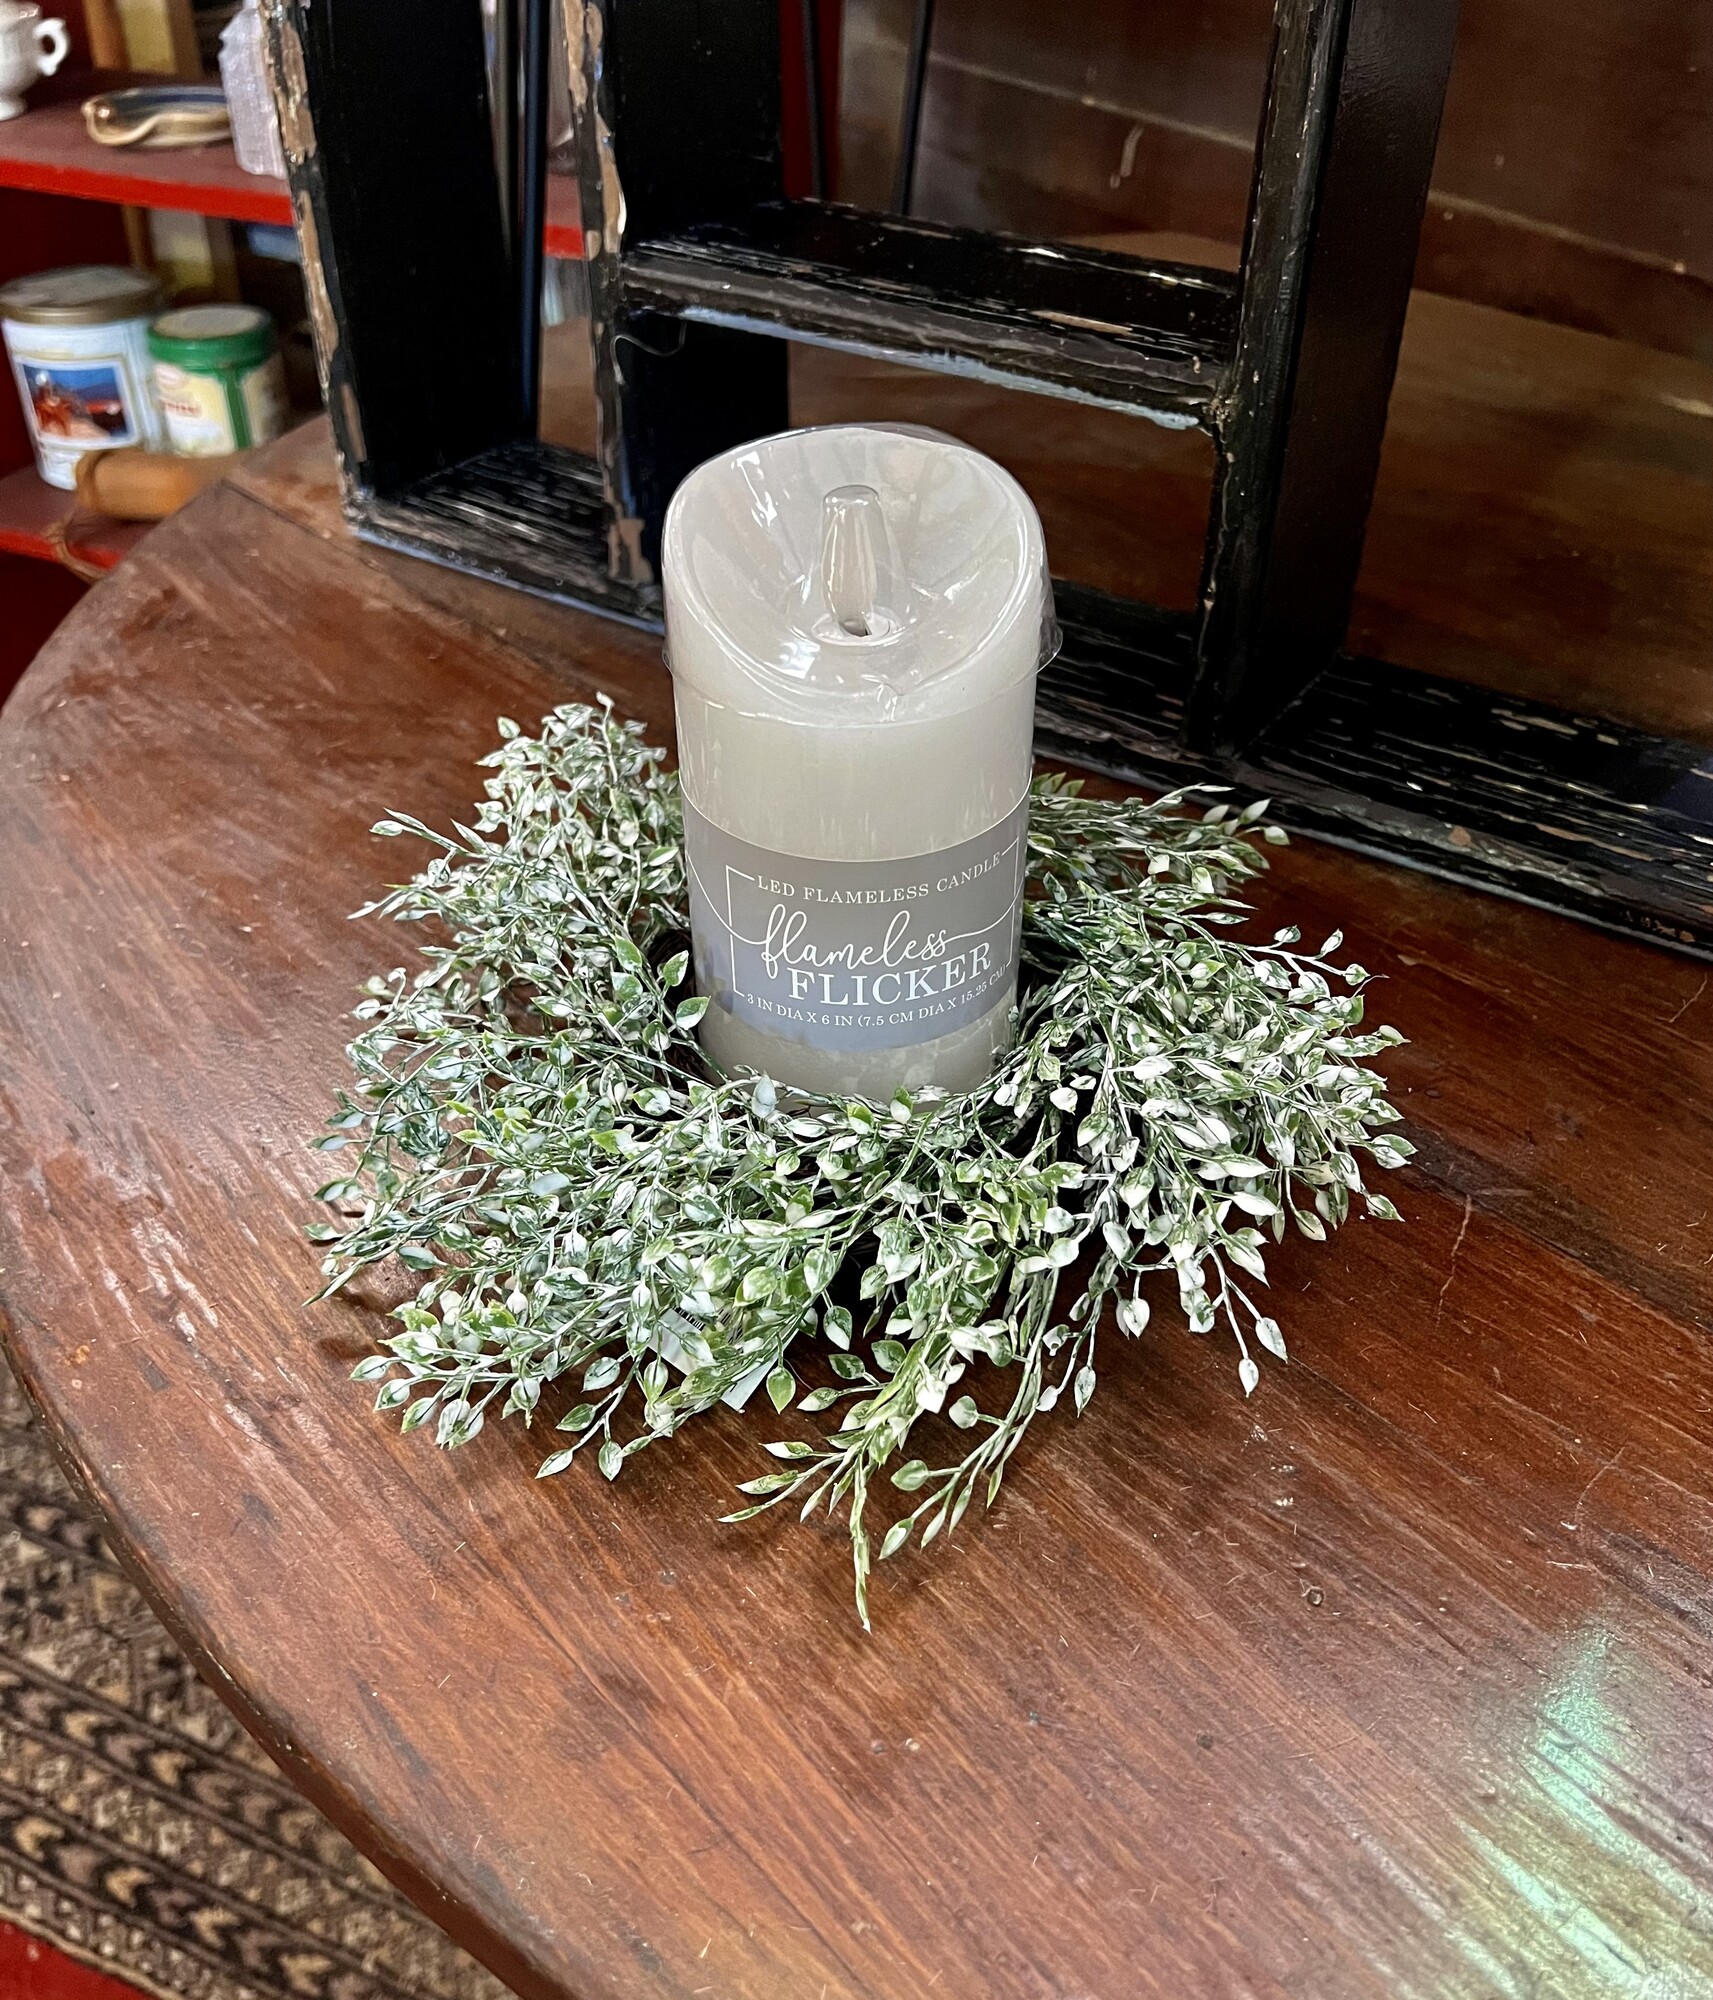 Little Luna Candle Ring has a grapevine base with stems of mini green leaves, accented with white, attached to the base. Ring has a 3 inch diameter and a 10 inch outside diameter. Use it around a candle or as a mini wreath accent on a wall or shelf groupings